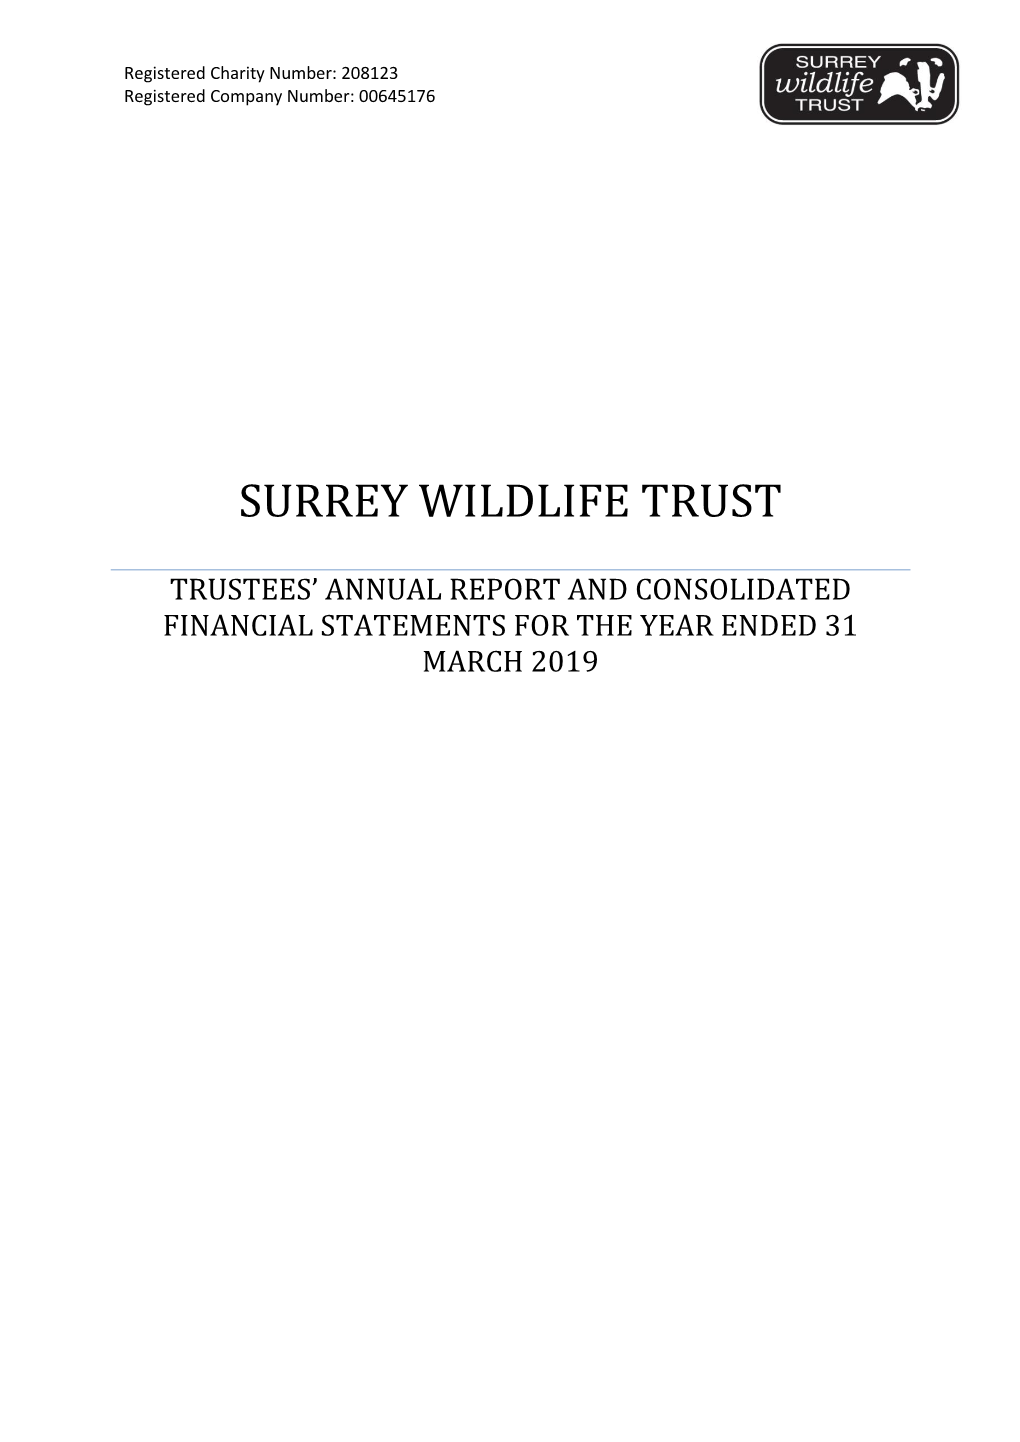 Trustees' Annual Report and Consolidated Financial Statements for the Year Ended 31 March 2019